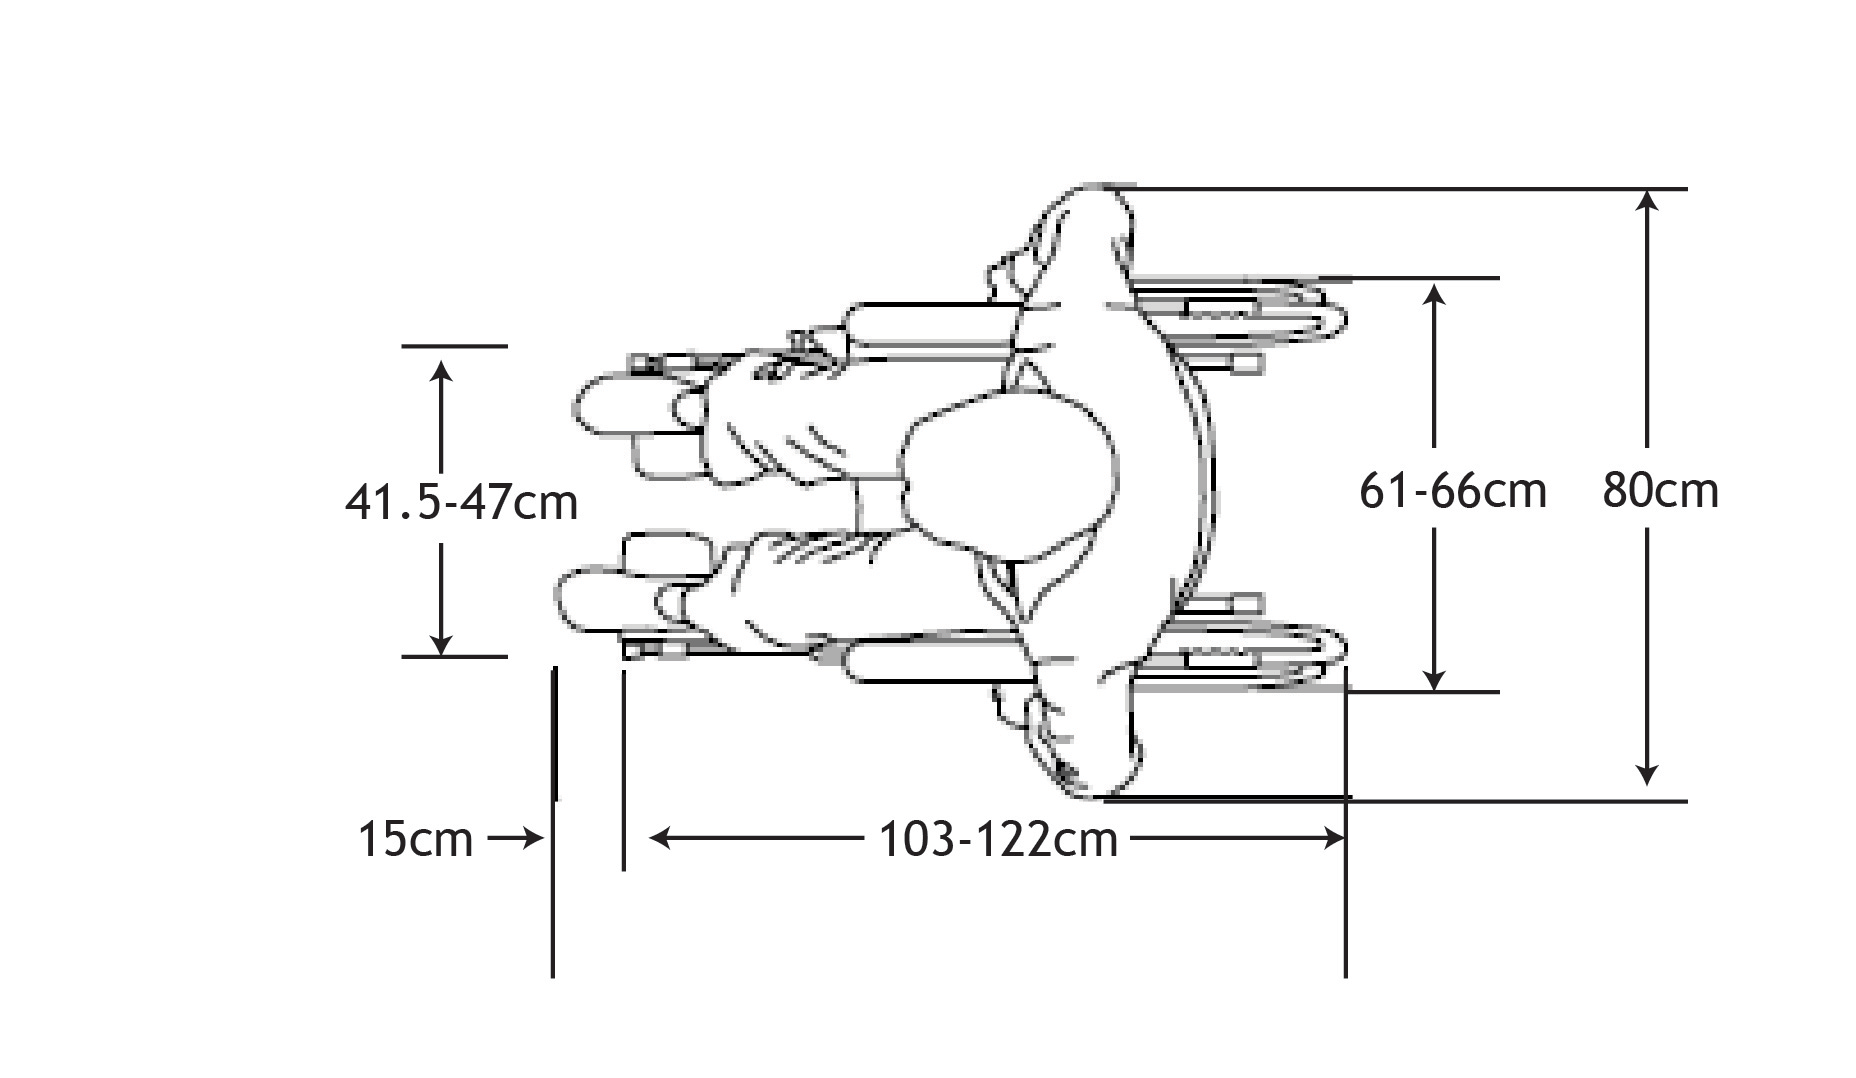 Fig. 20.22 Wheelchair dimensions and the anthropometric measurements indicated in the preceding diagrams should be considered in sizing the backrest.